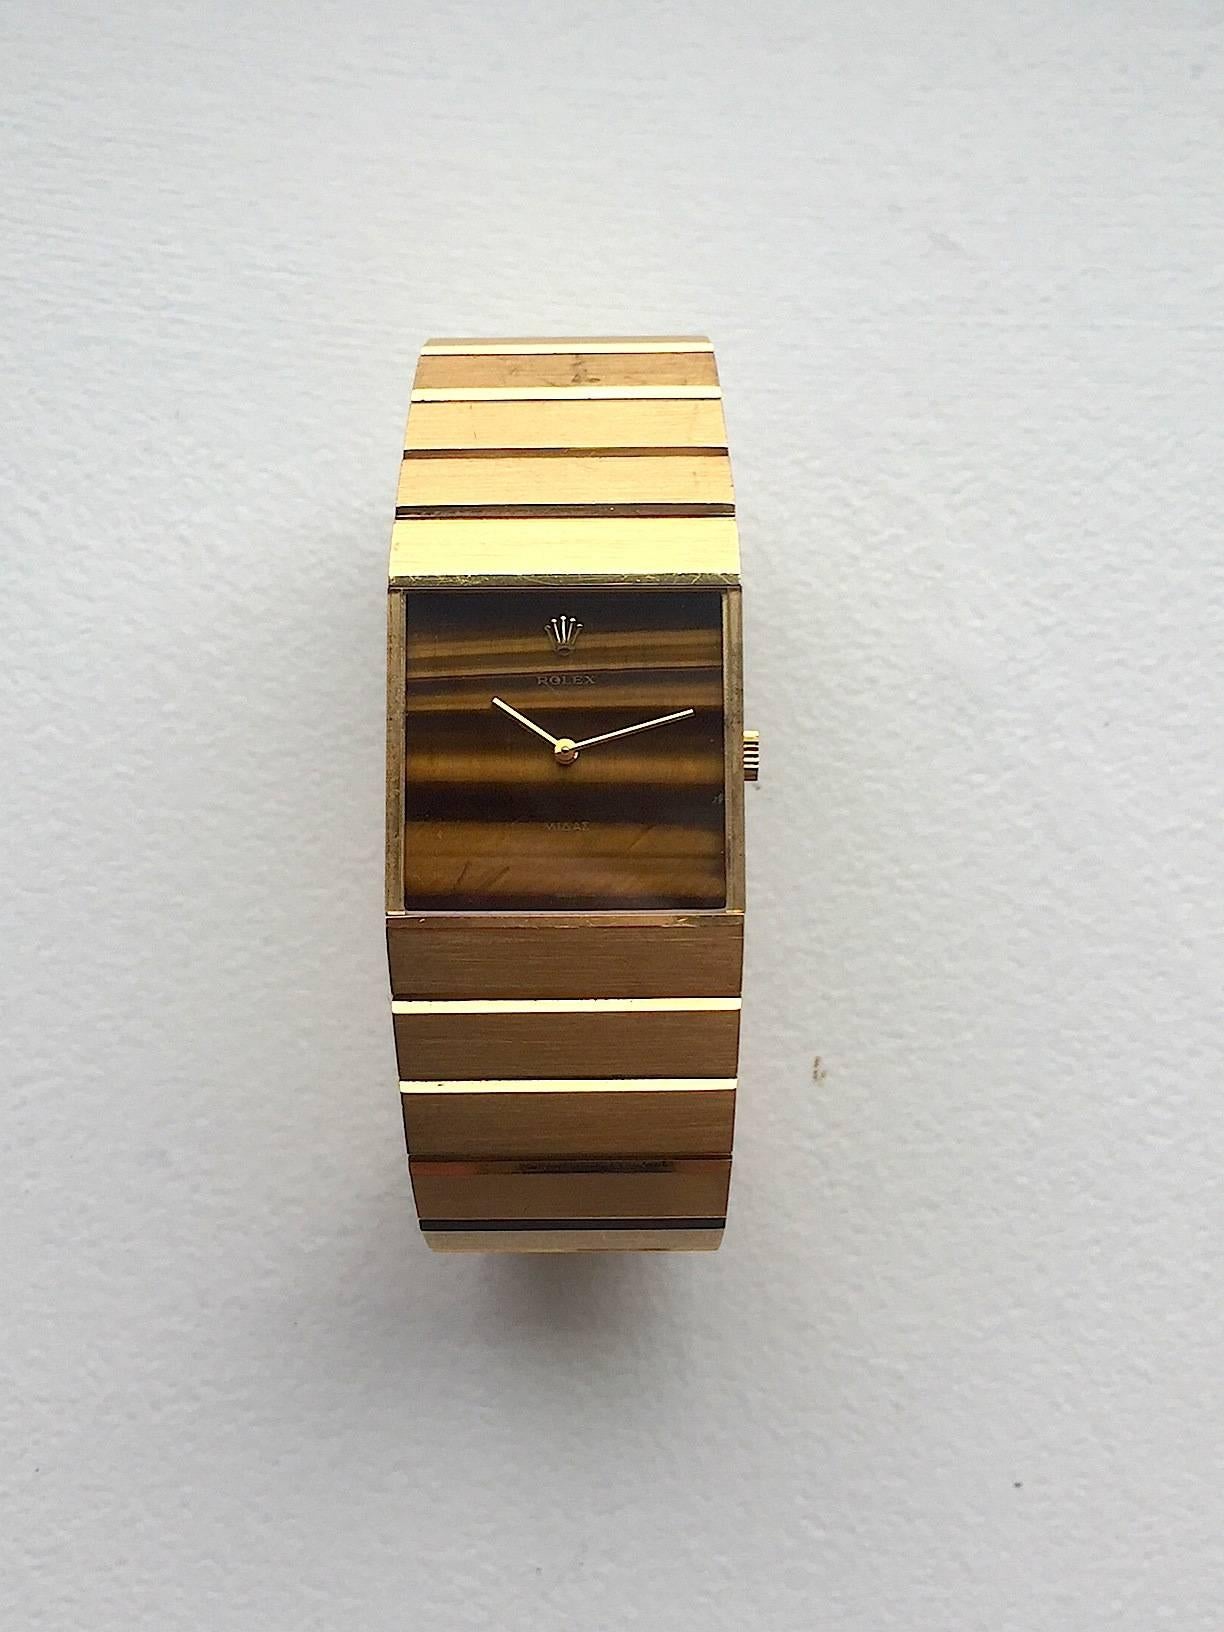 Rolex 18K Yellow Gold King Midas Tiger's Eye Manual Wind Wristwatch
Beautiful Factory Tiger's Eye Stone Dial
Solid 18K Yellow Gold Case
25mm x 35mm
Features Rolex Manual Wind Movement
Sapphire Crystal
From Early 1970's
Features a Solid Rolex 18K